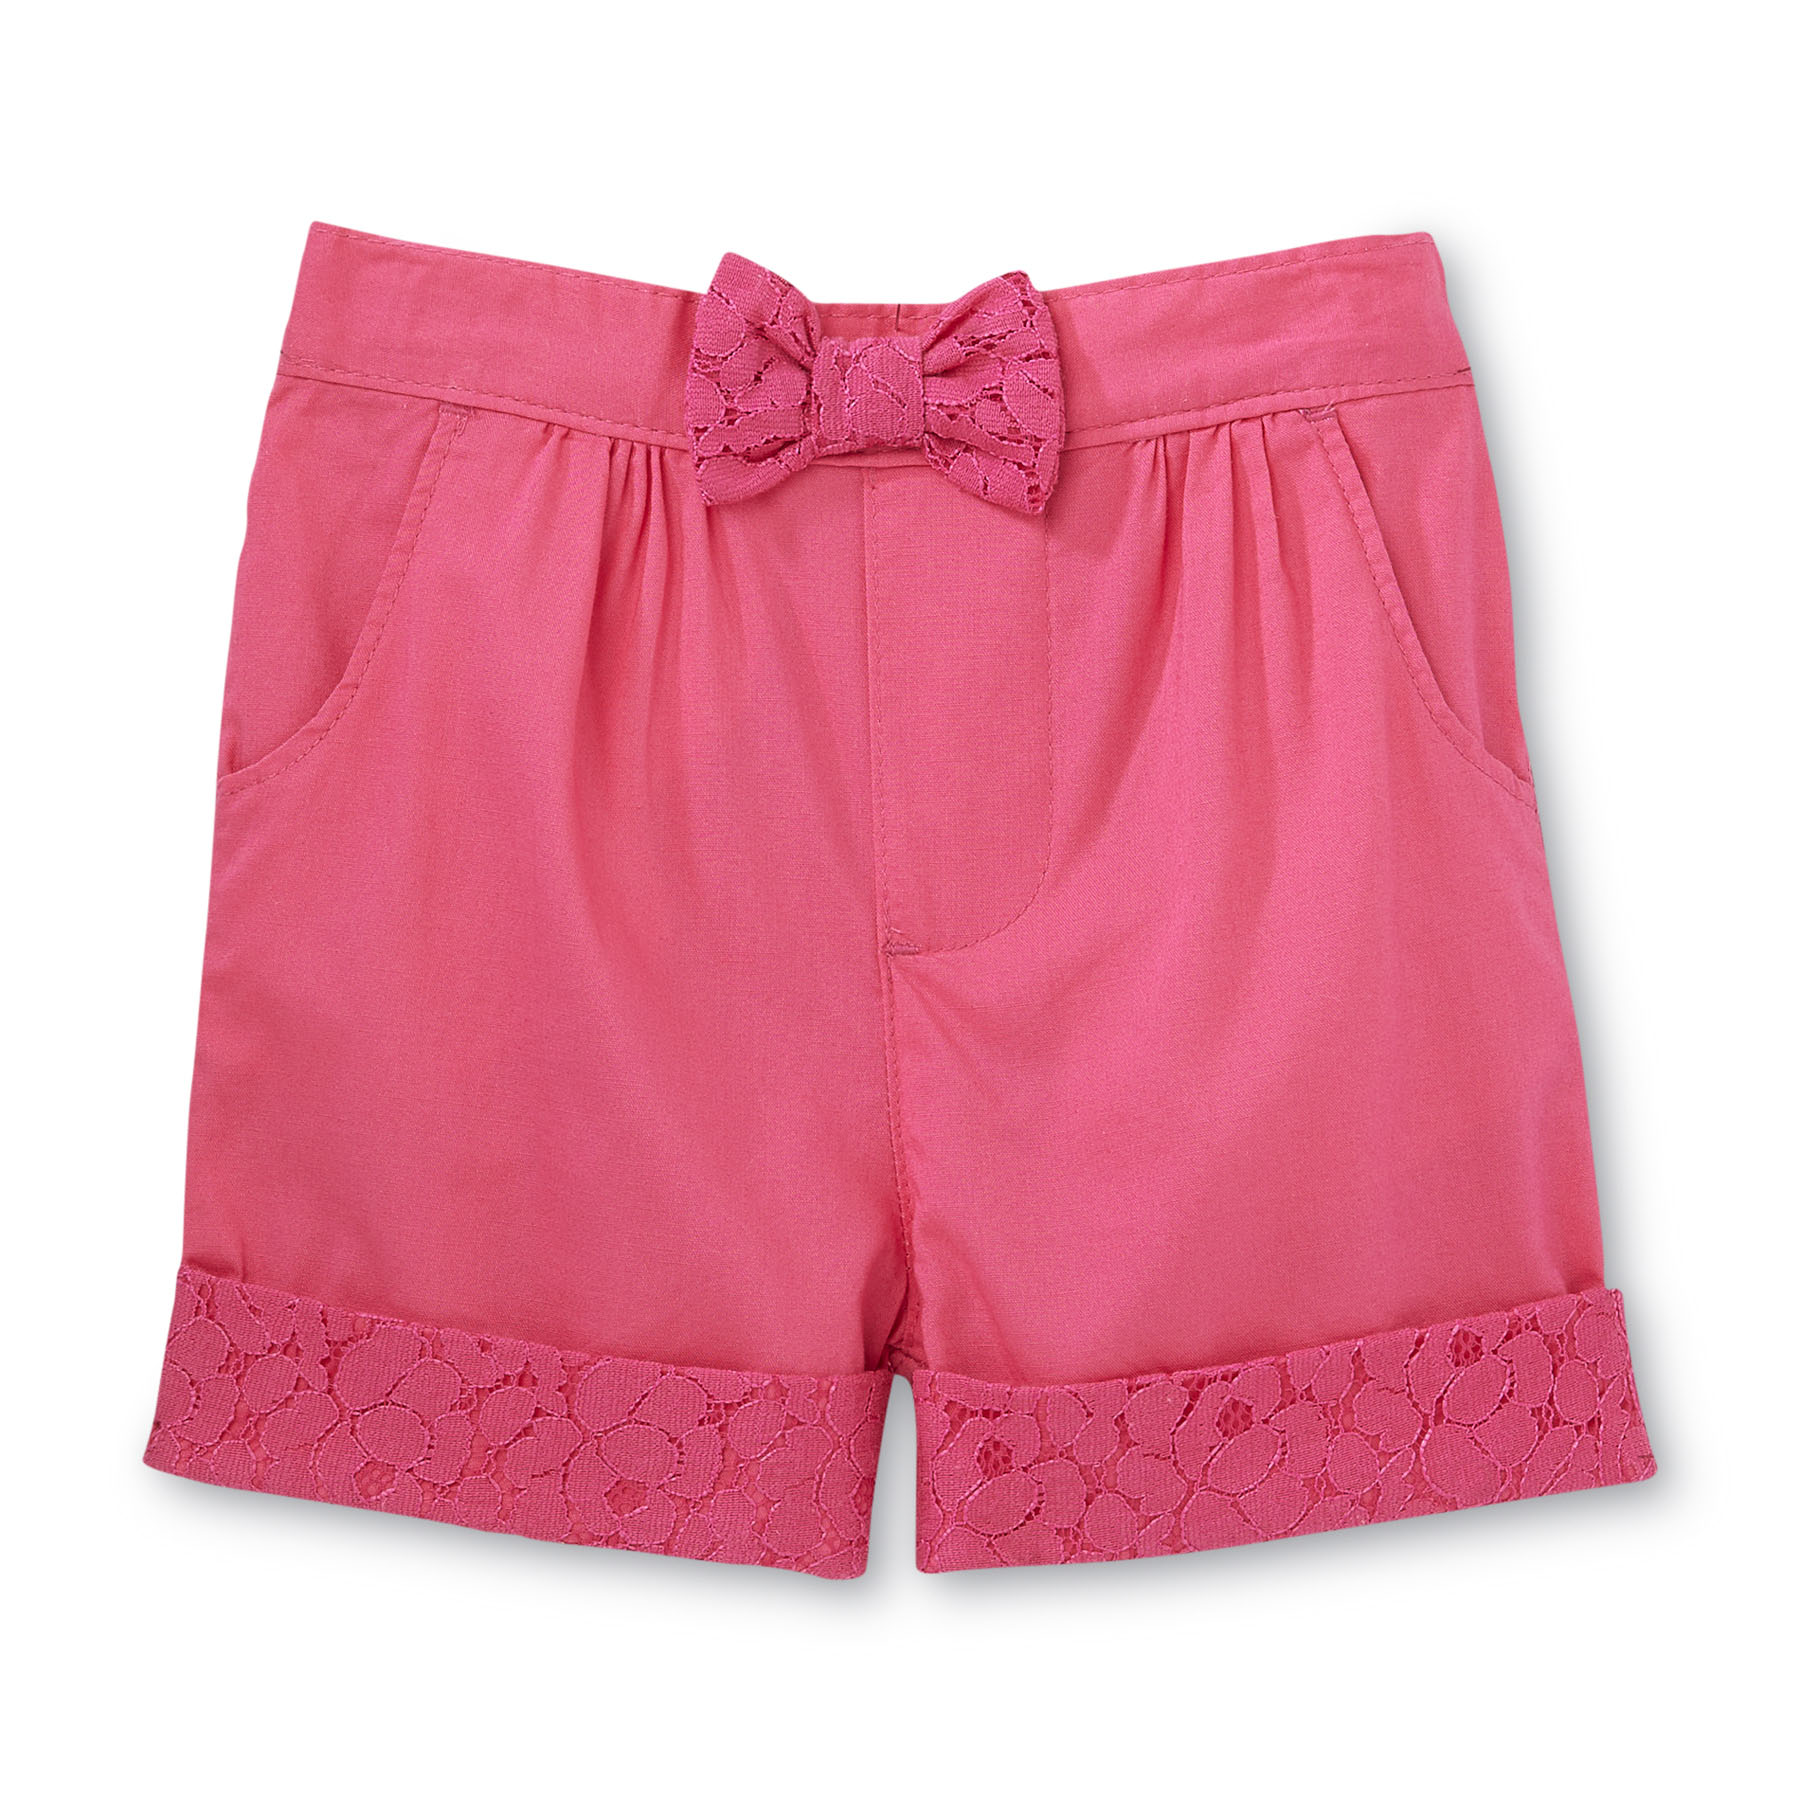 Toughskins Infant & Toddler Girl's Cuffed Poplin Shorts - Lace